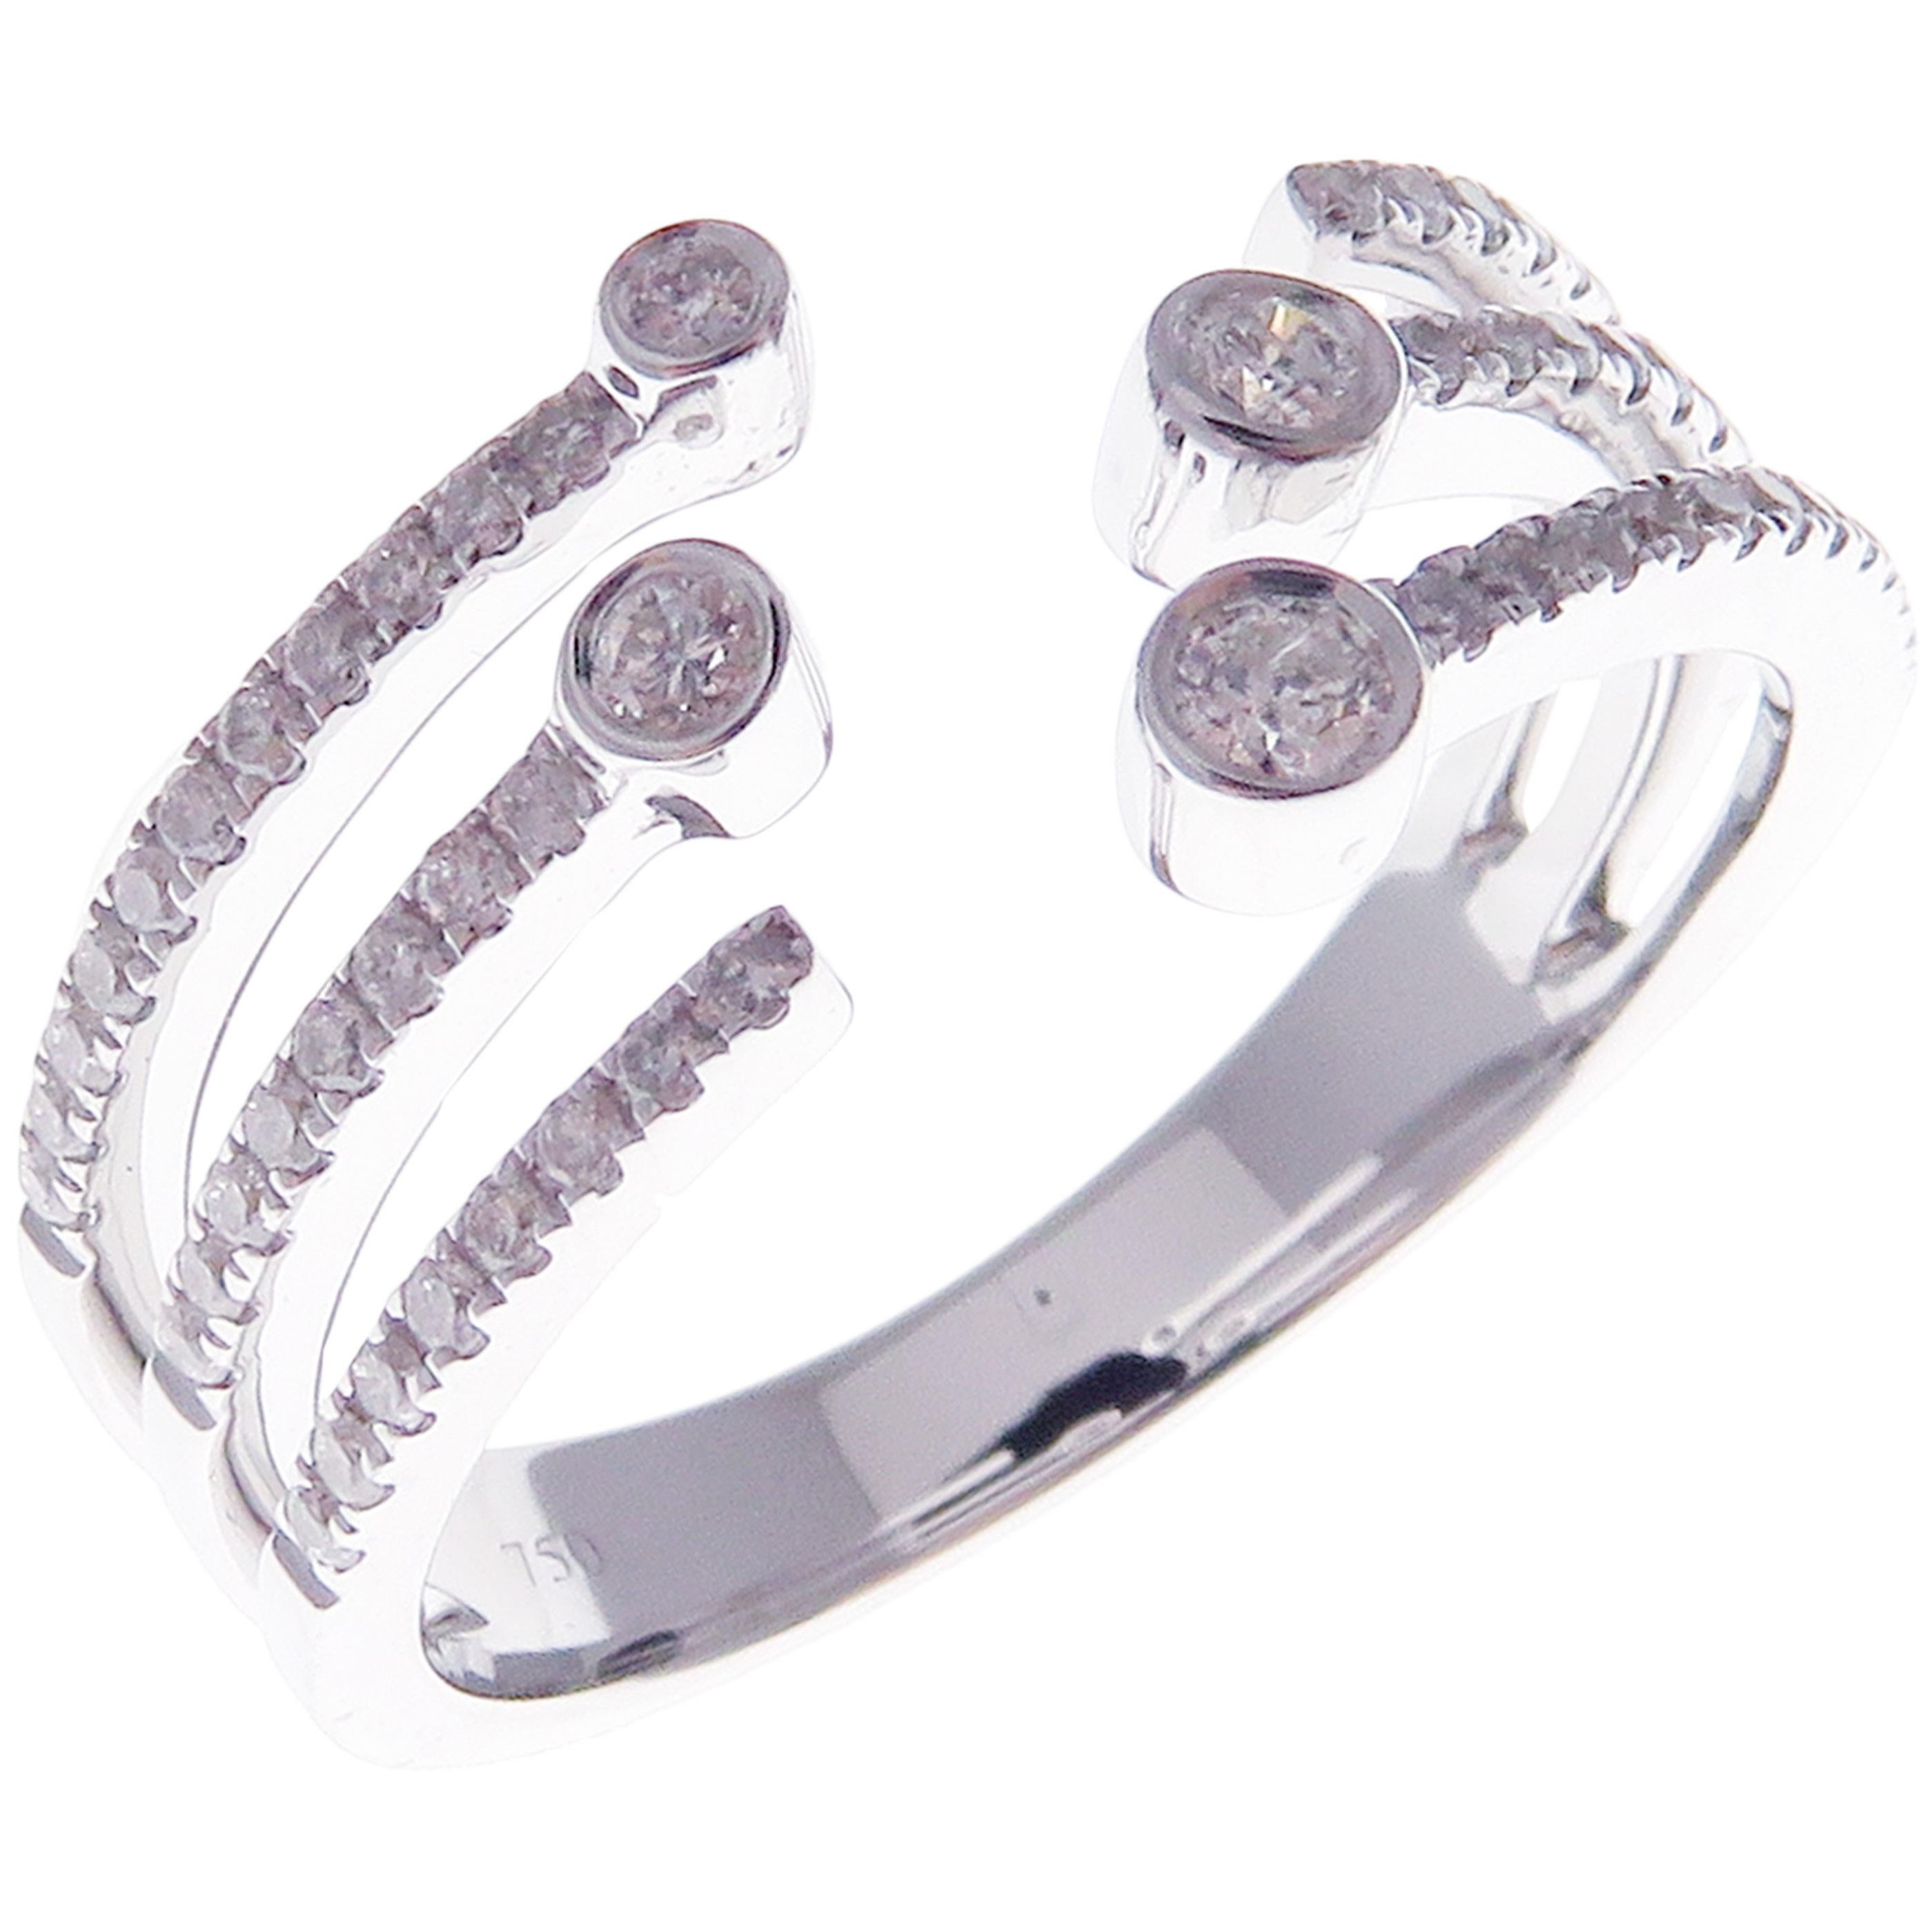 This trendy multi-layer open ring is crafted in 18-karat white gold, featuring 57 round white diamonds totaling of 0.34 carats.
Approximate total weight 4.41 grams.
Standard Ring size 7
SI-G Quality natural white diamonds.